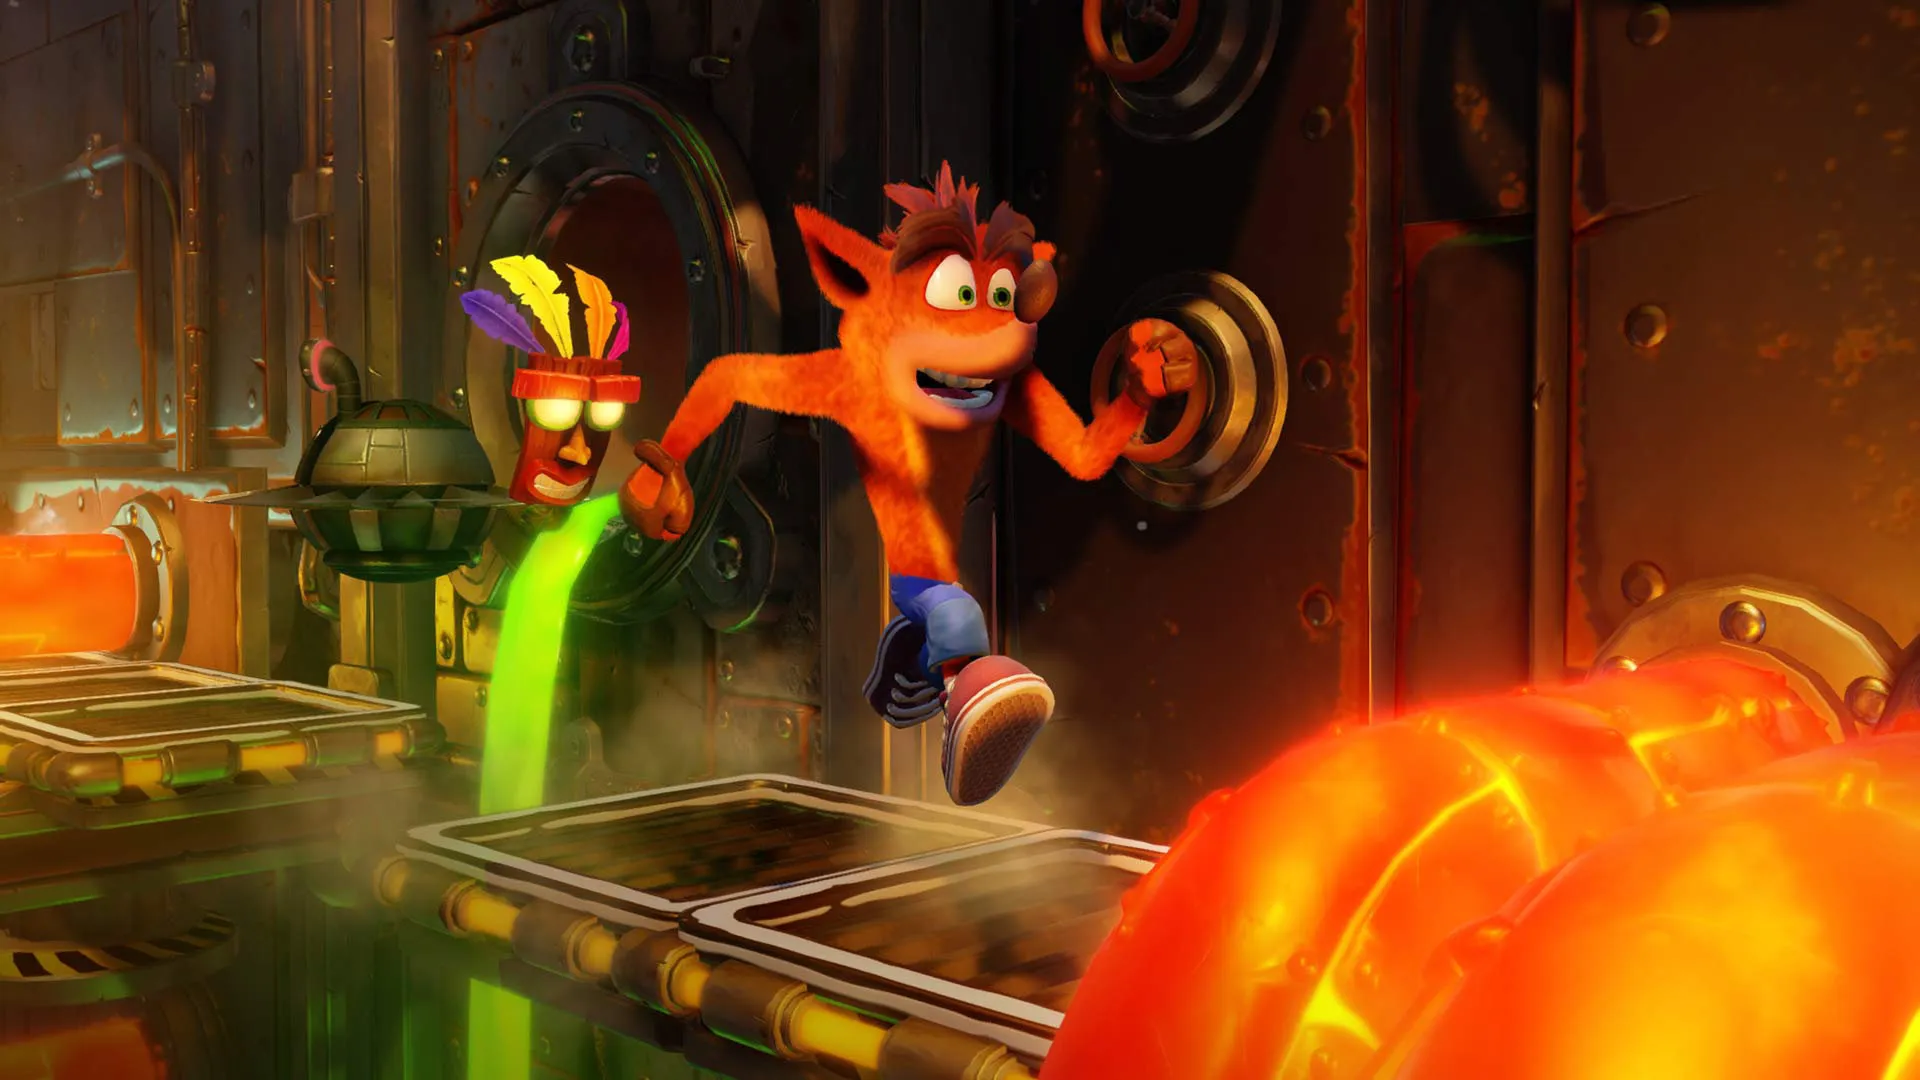 Crash Bandicoot 4: It's About Time review: This is the Crash game you've  been waiting over two decades to play